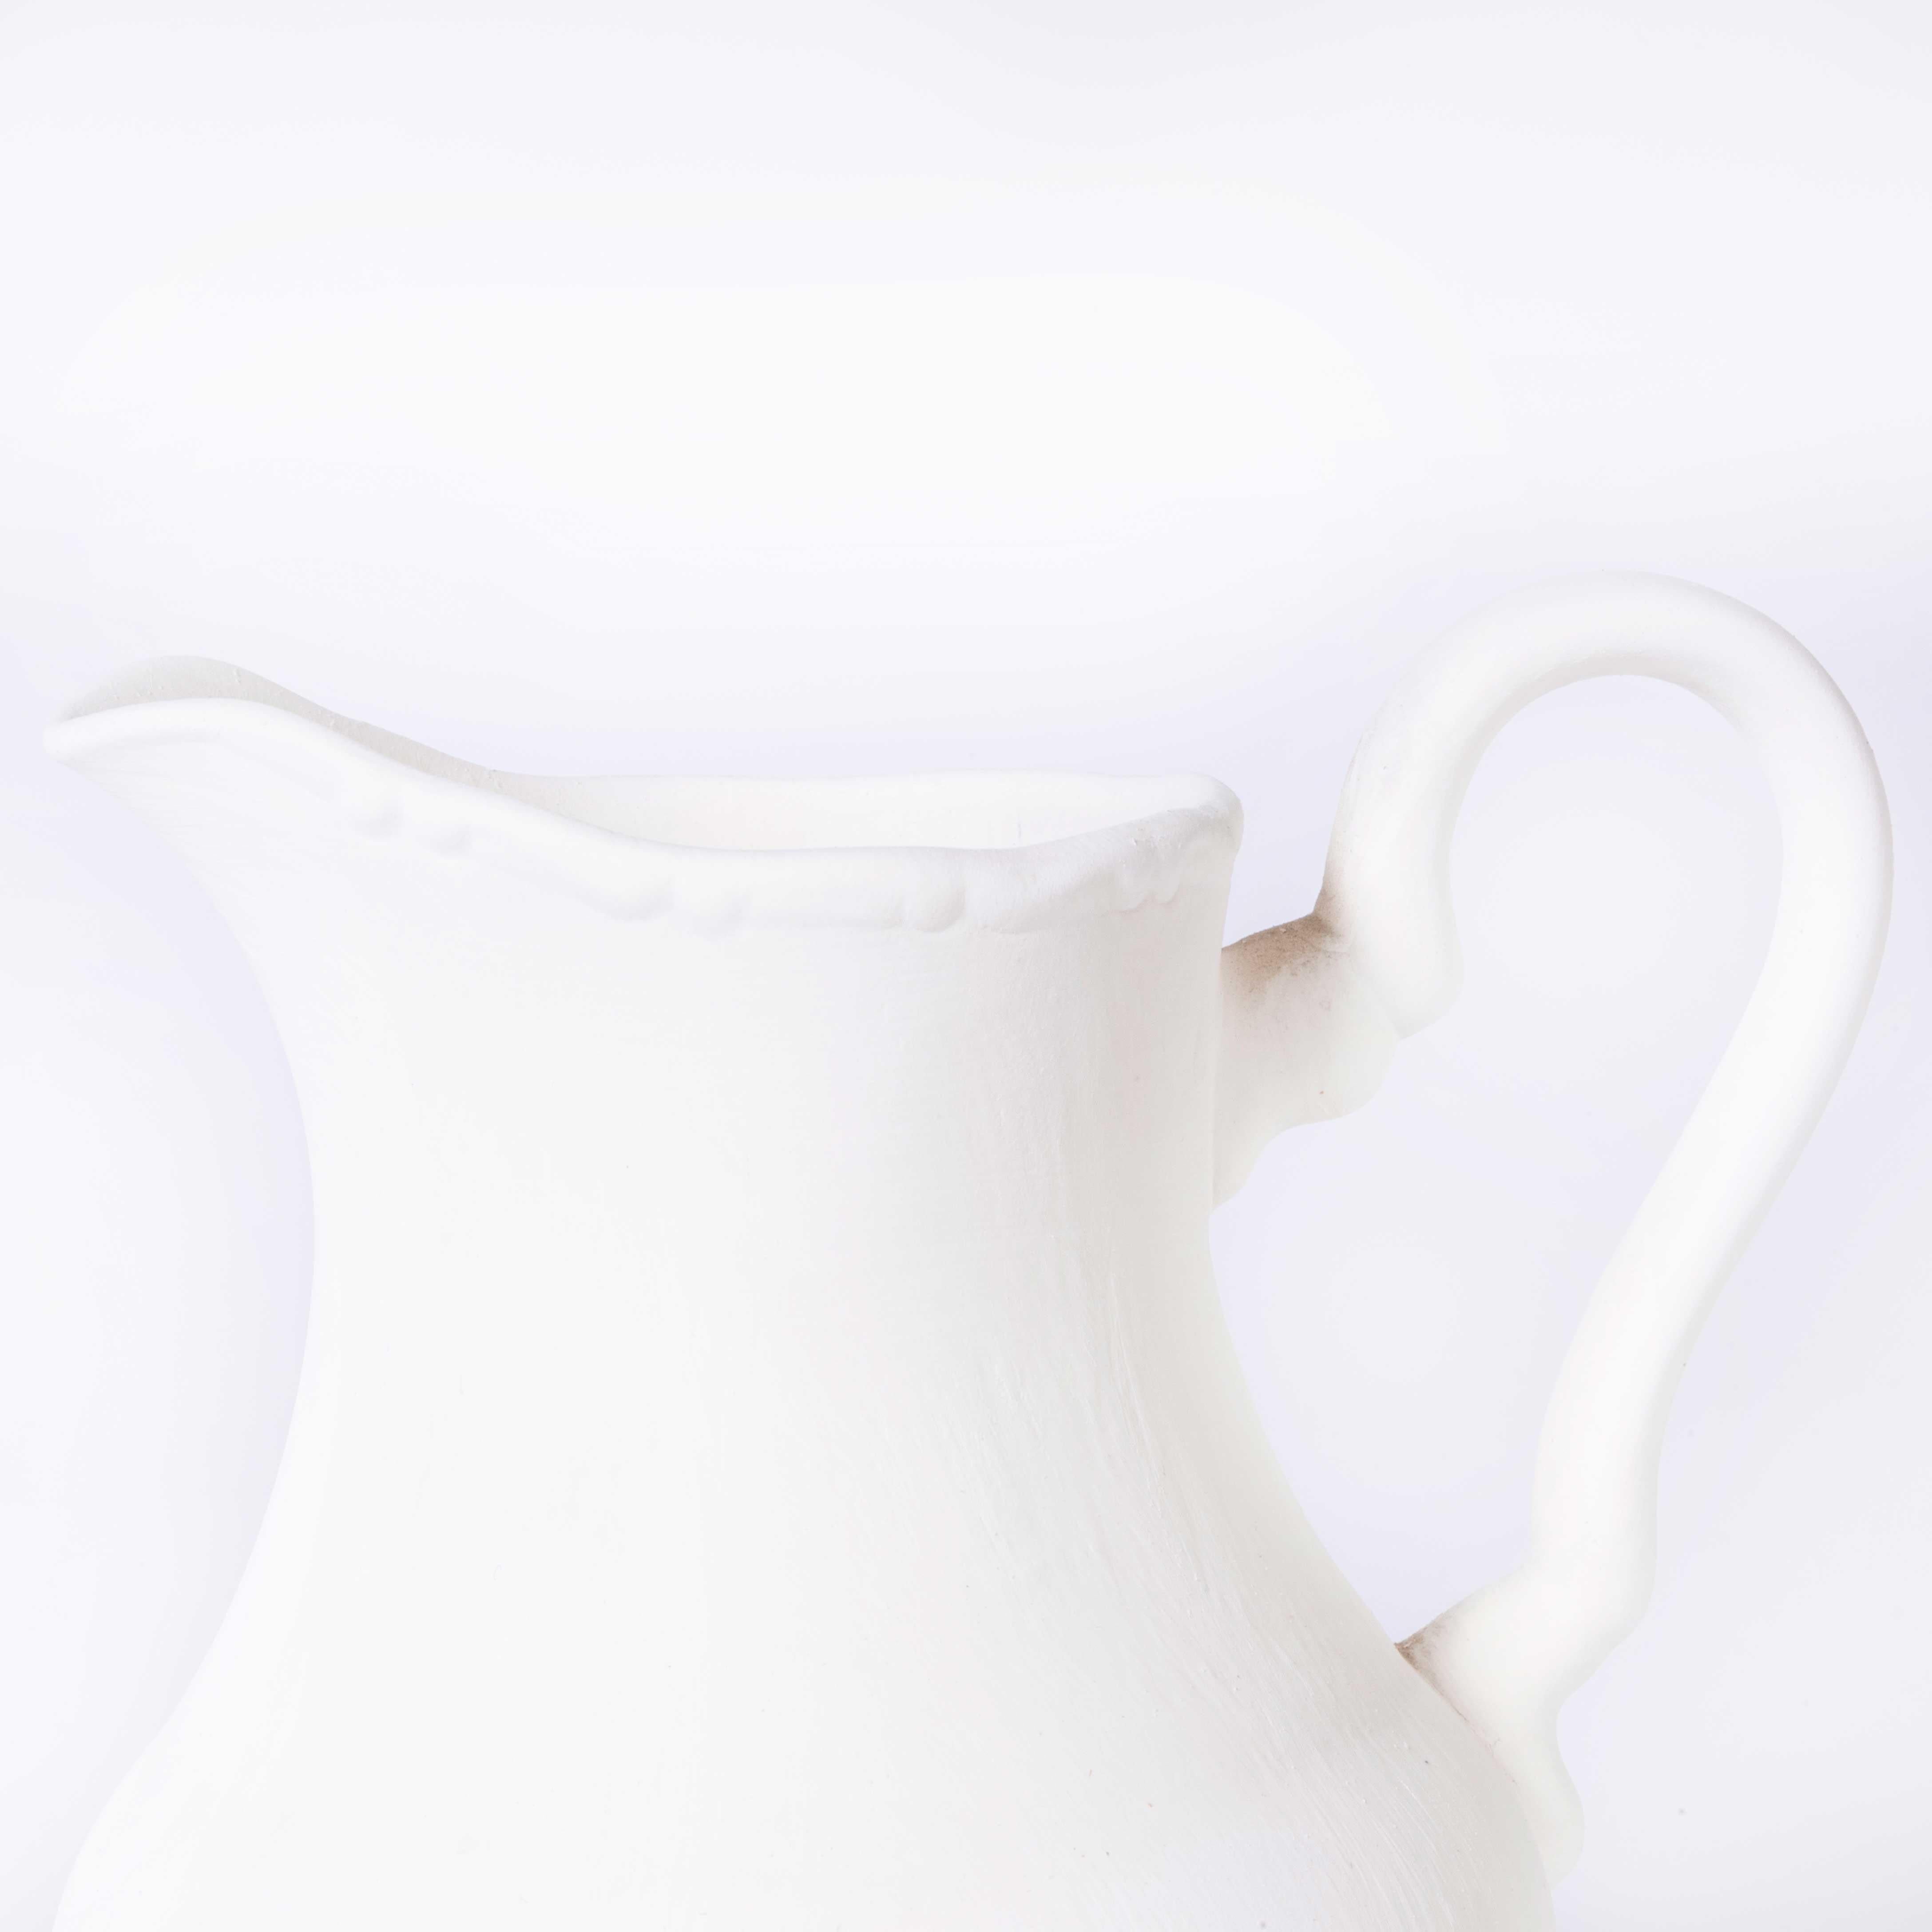 19th Century New Old Stock Raw Ceramic Small White Jug For Sale